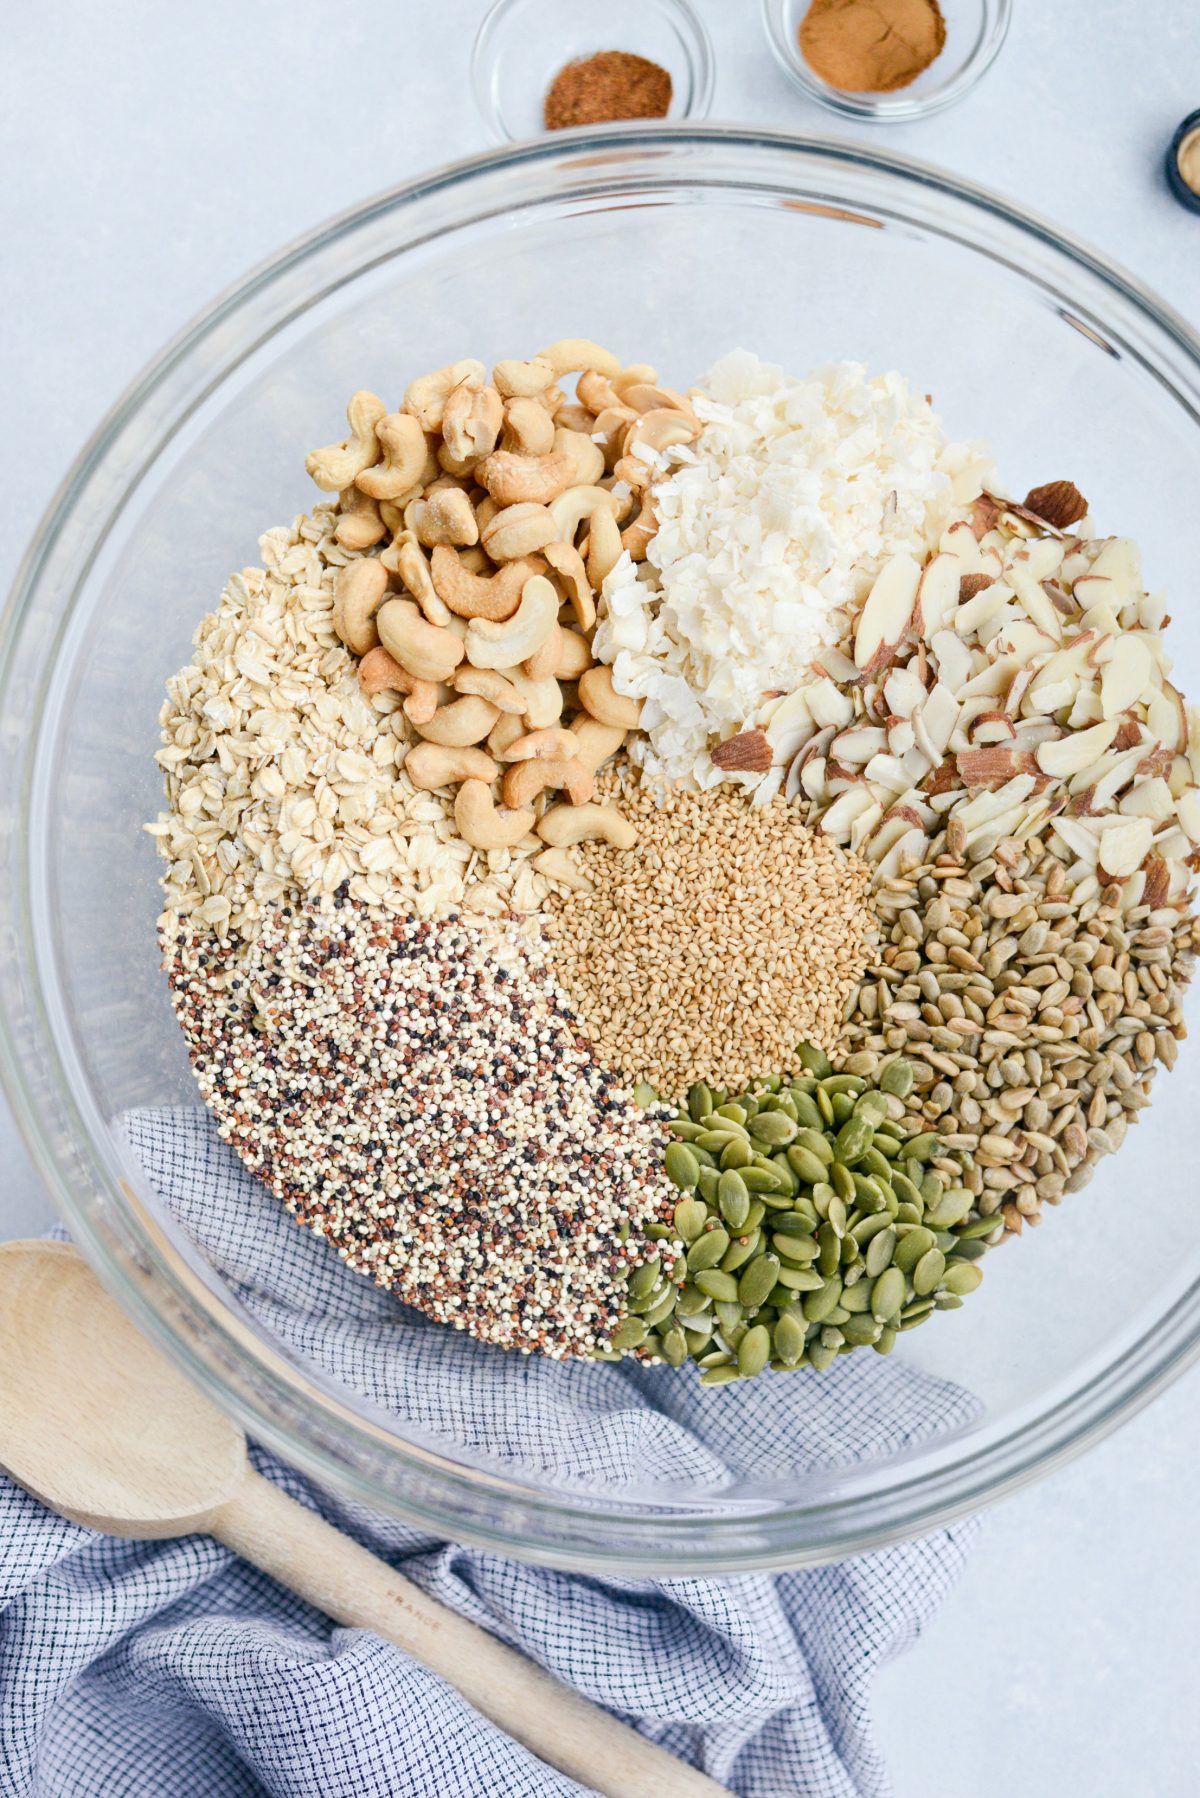 add oats, nuts and seeds to bowl.